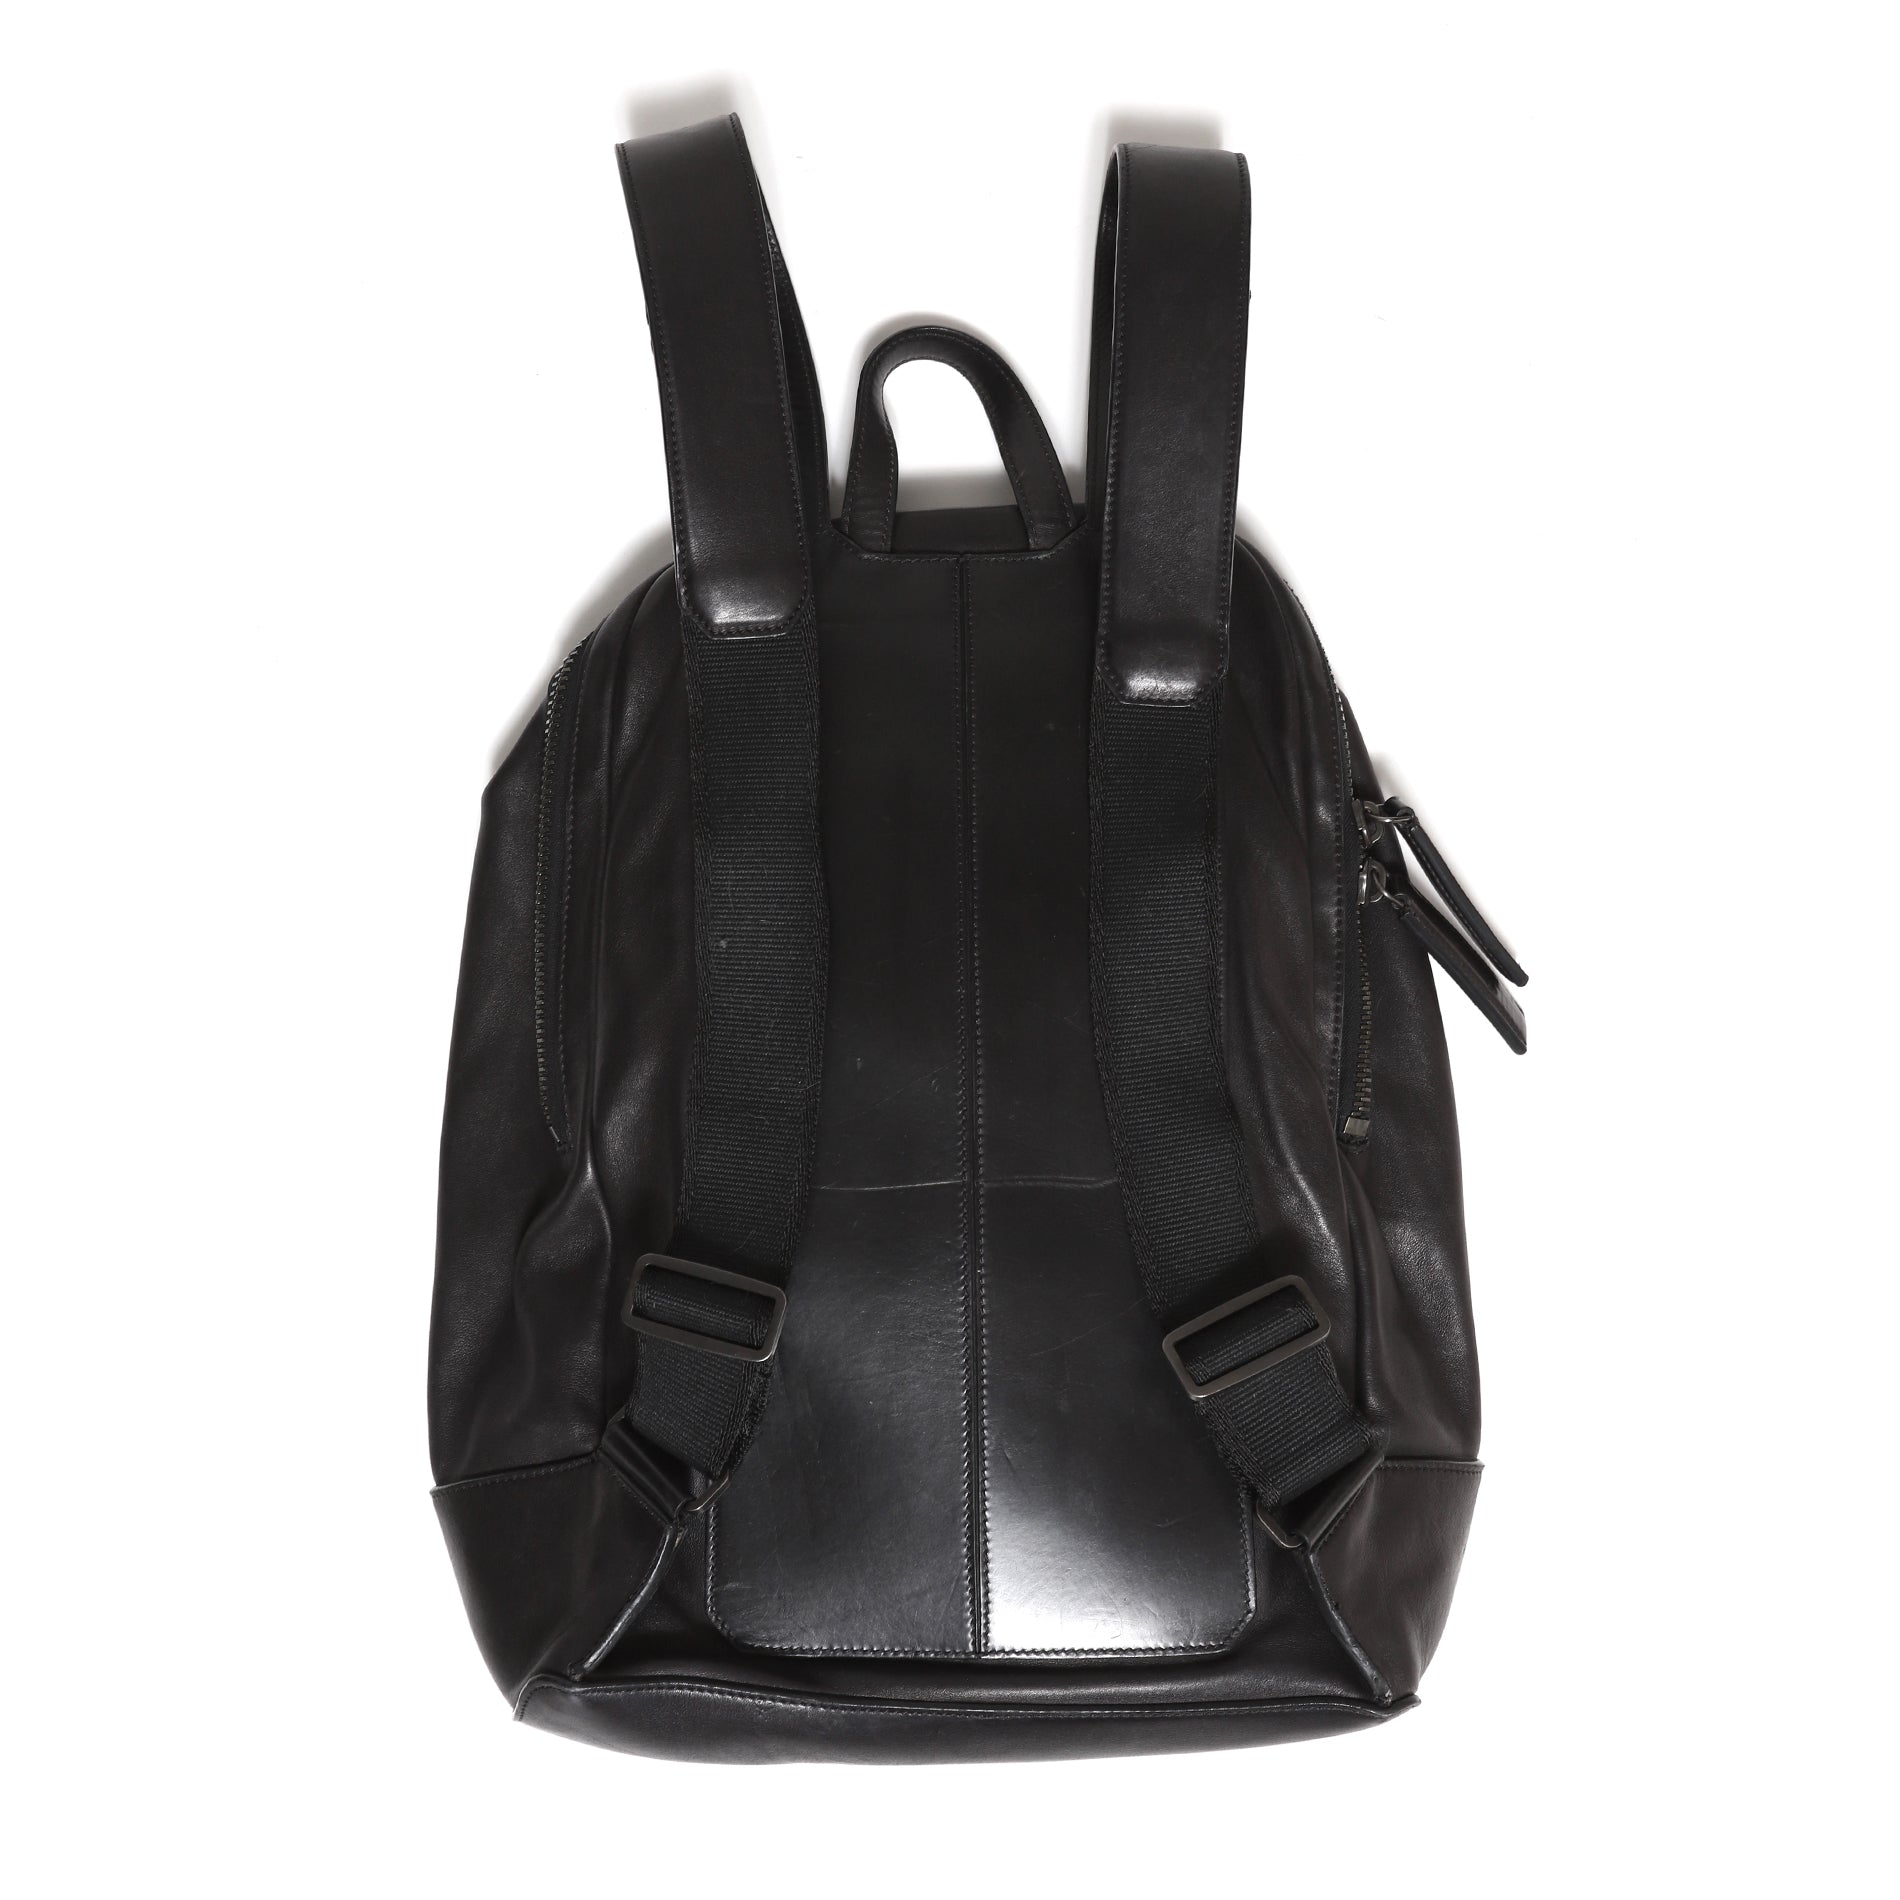 Berluti by Haider Ackermann FW17 Leather Backpack